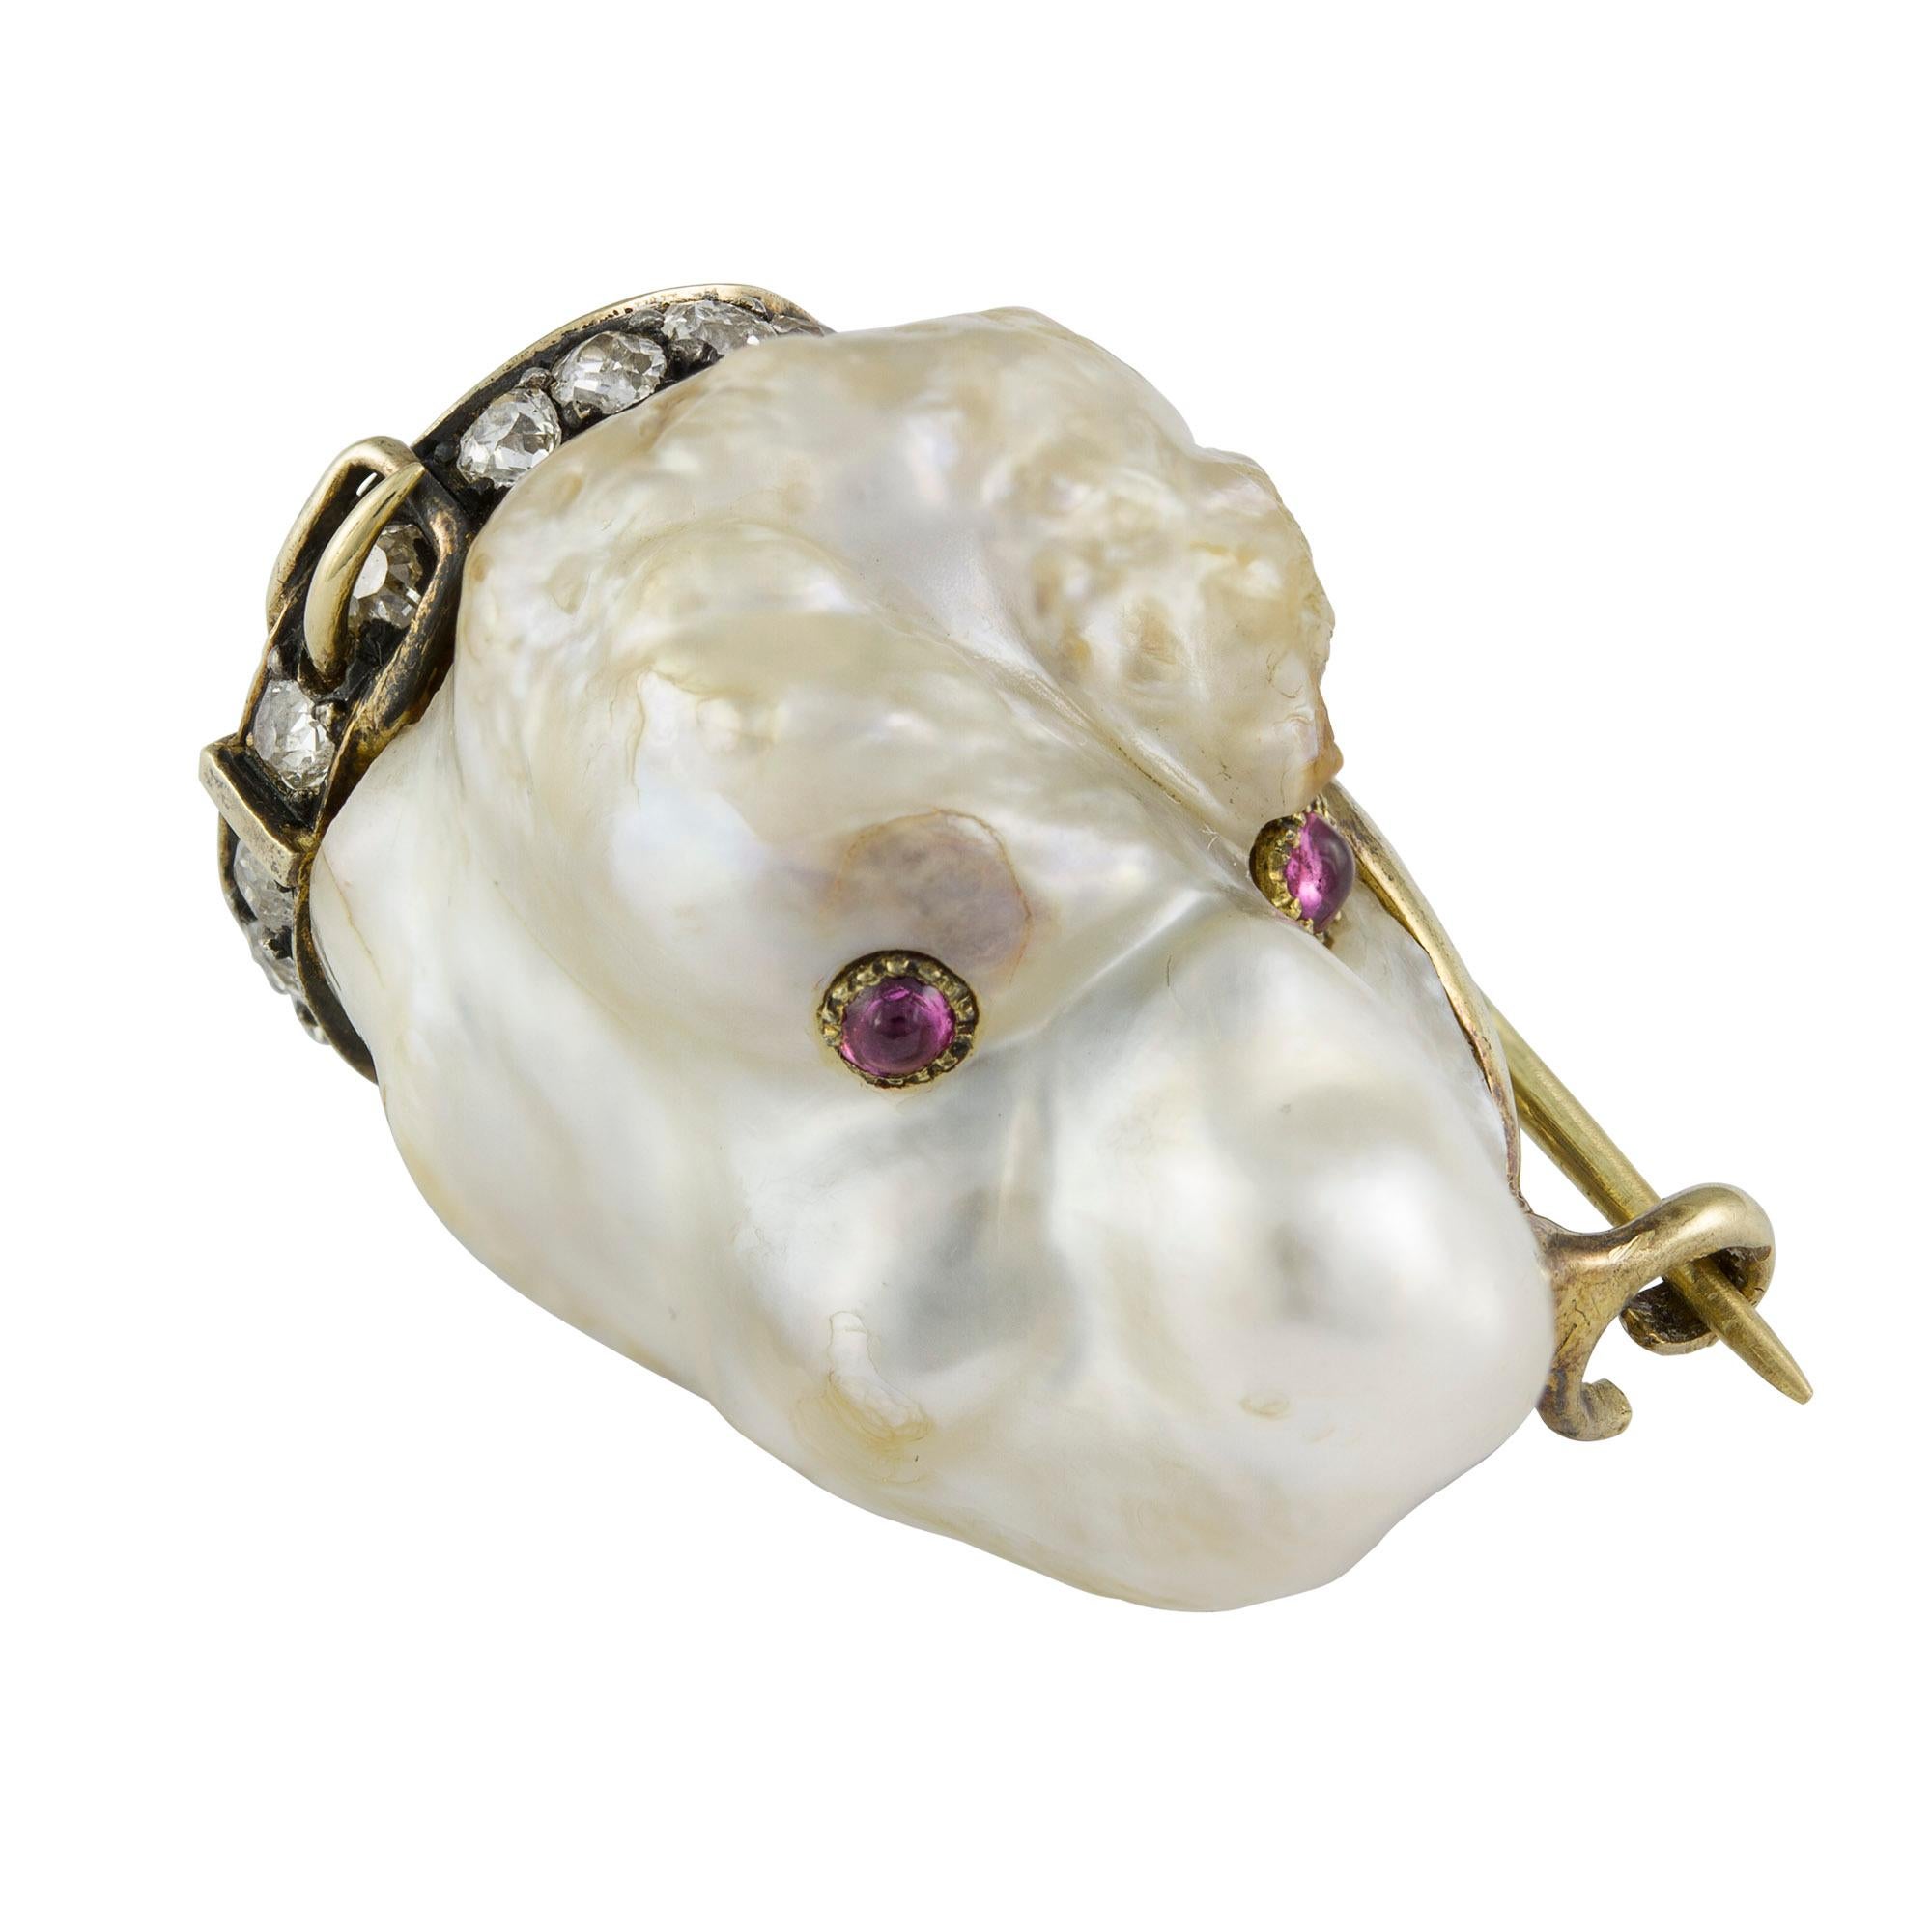 A late Victorian pearl, gem set and diamond dog brooch, the natural blister pearl dog shaped pearl, accompanied by a GIA certificate, with cabochon-cut ruby eyes and old brilliant-cut diamond-set collar to a closed back gold mount with brooch pin